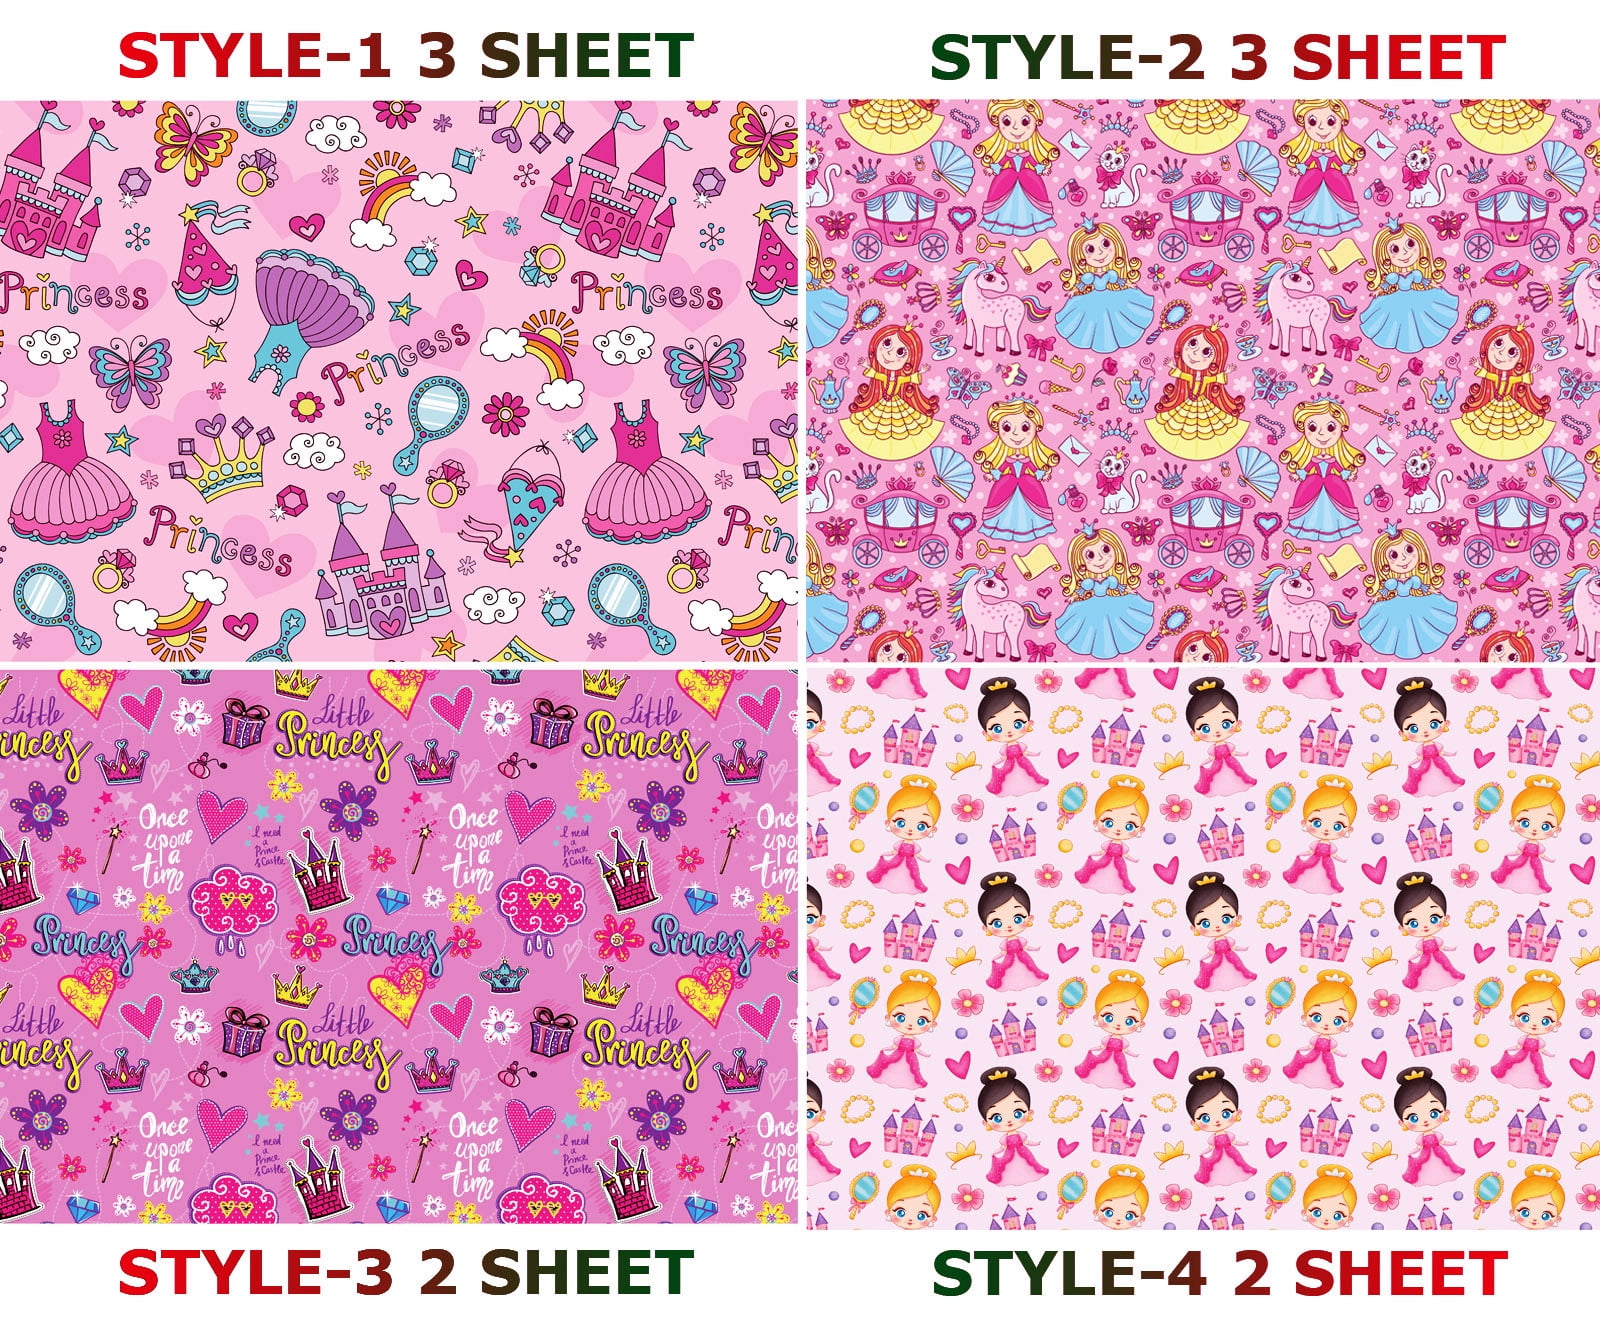 NEW VTG 80s Wrapping Paper Sheet All Occasion Gift Flat Wrap Pink Splash  30”x20”